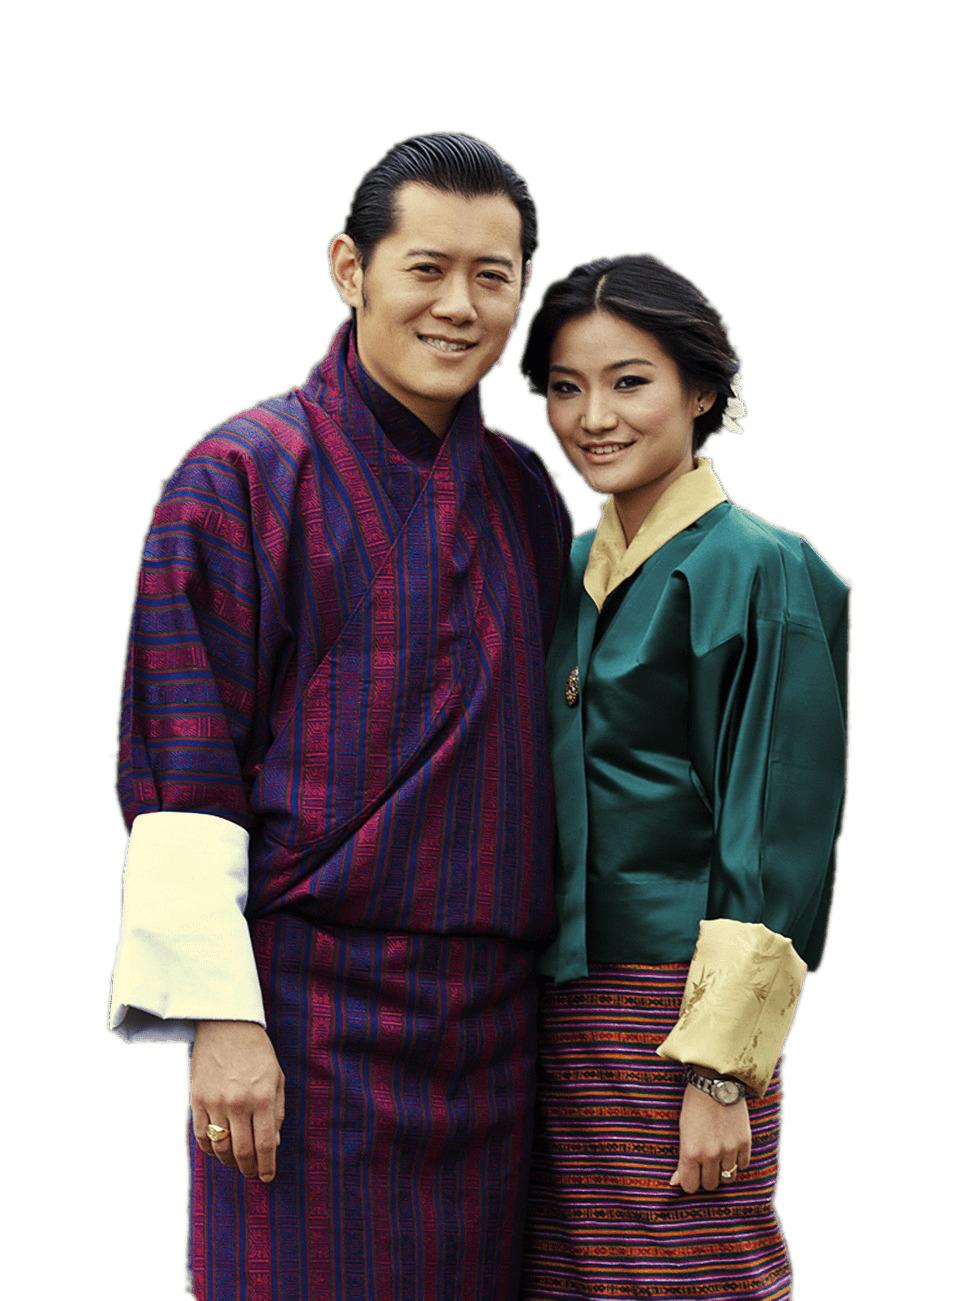 Bhutan King and Queen png transparent